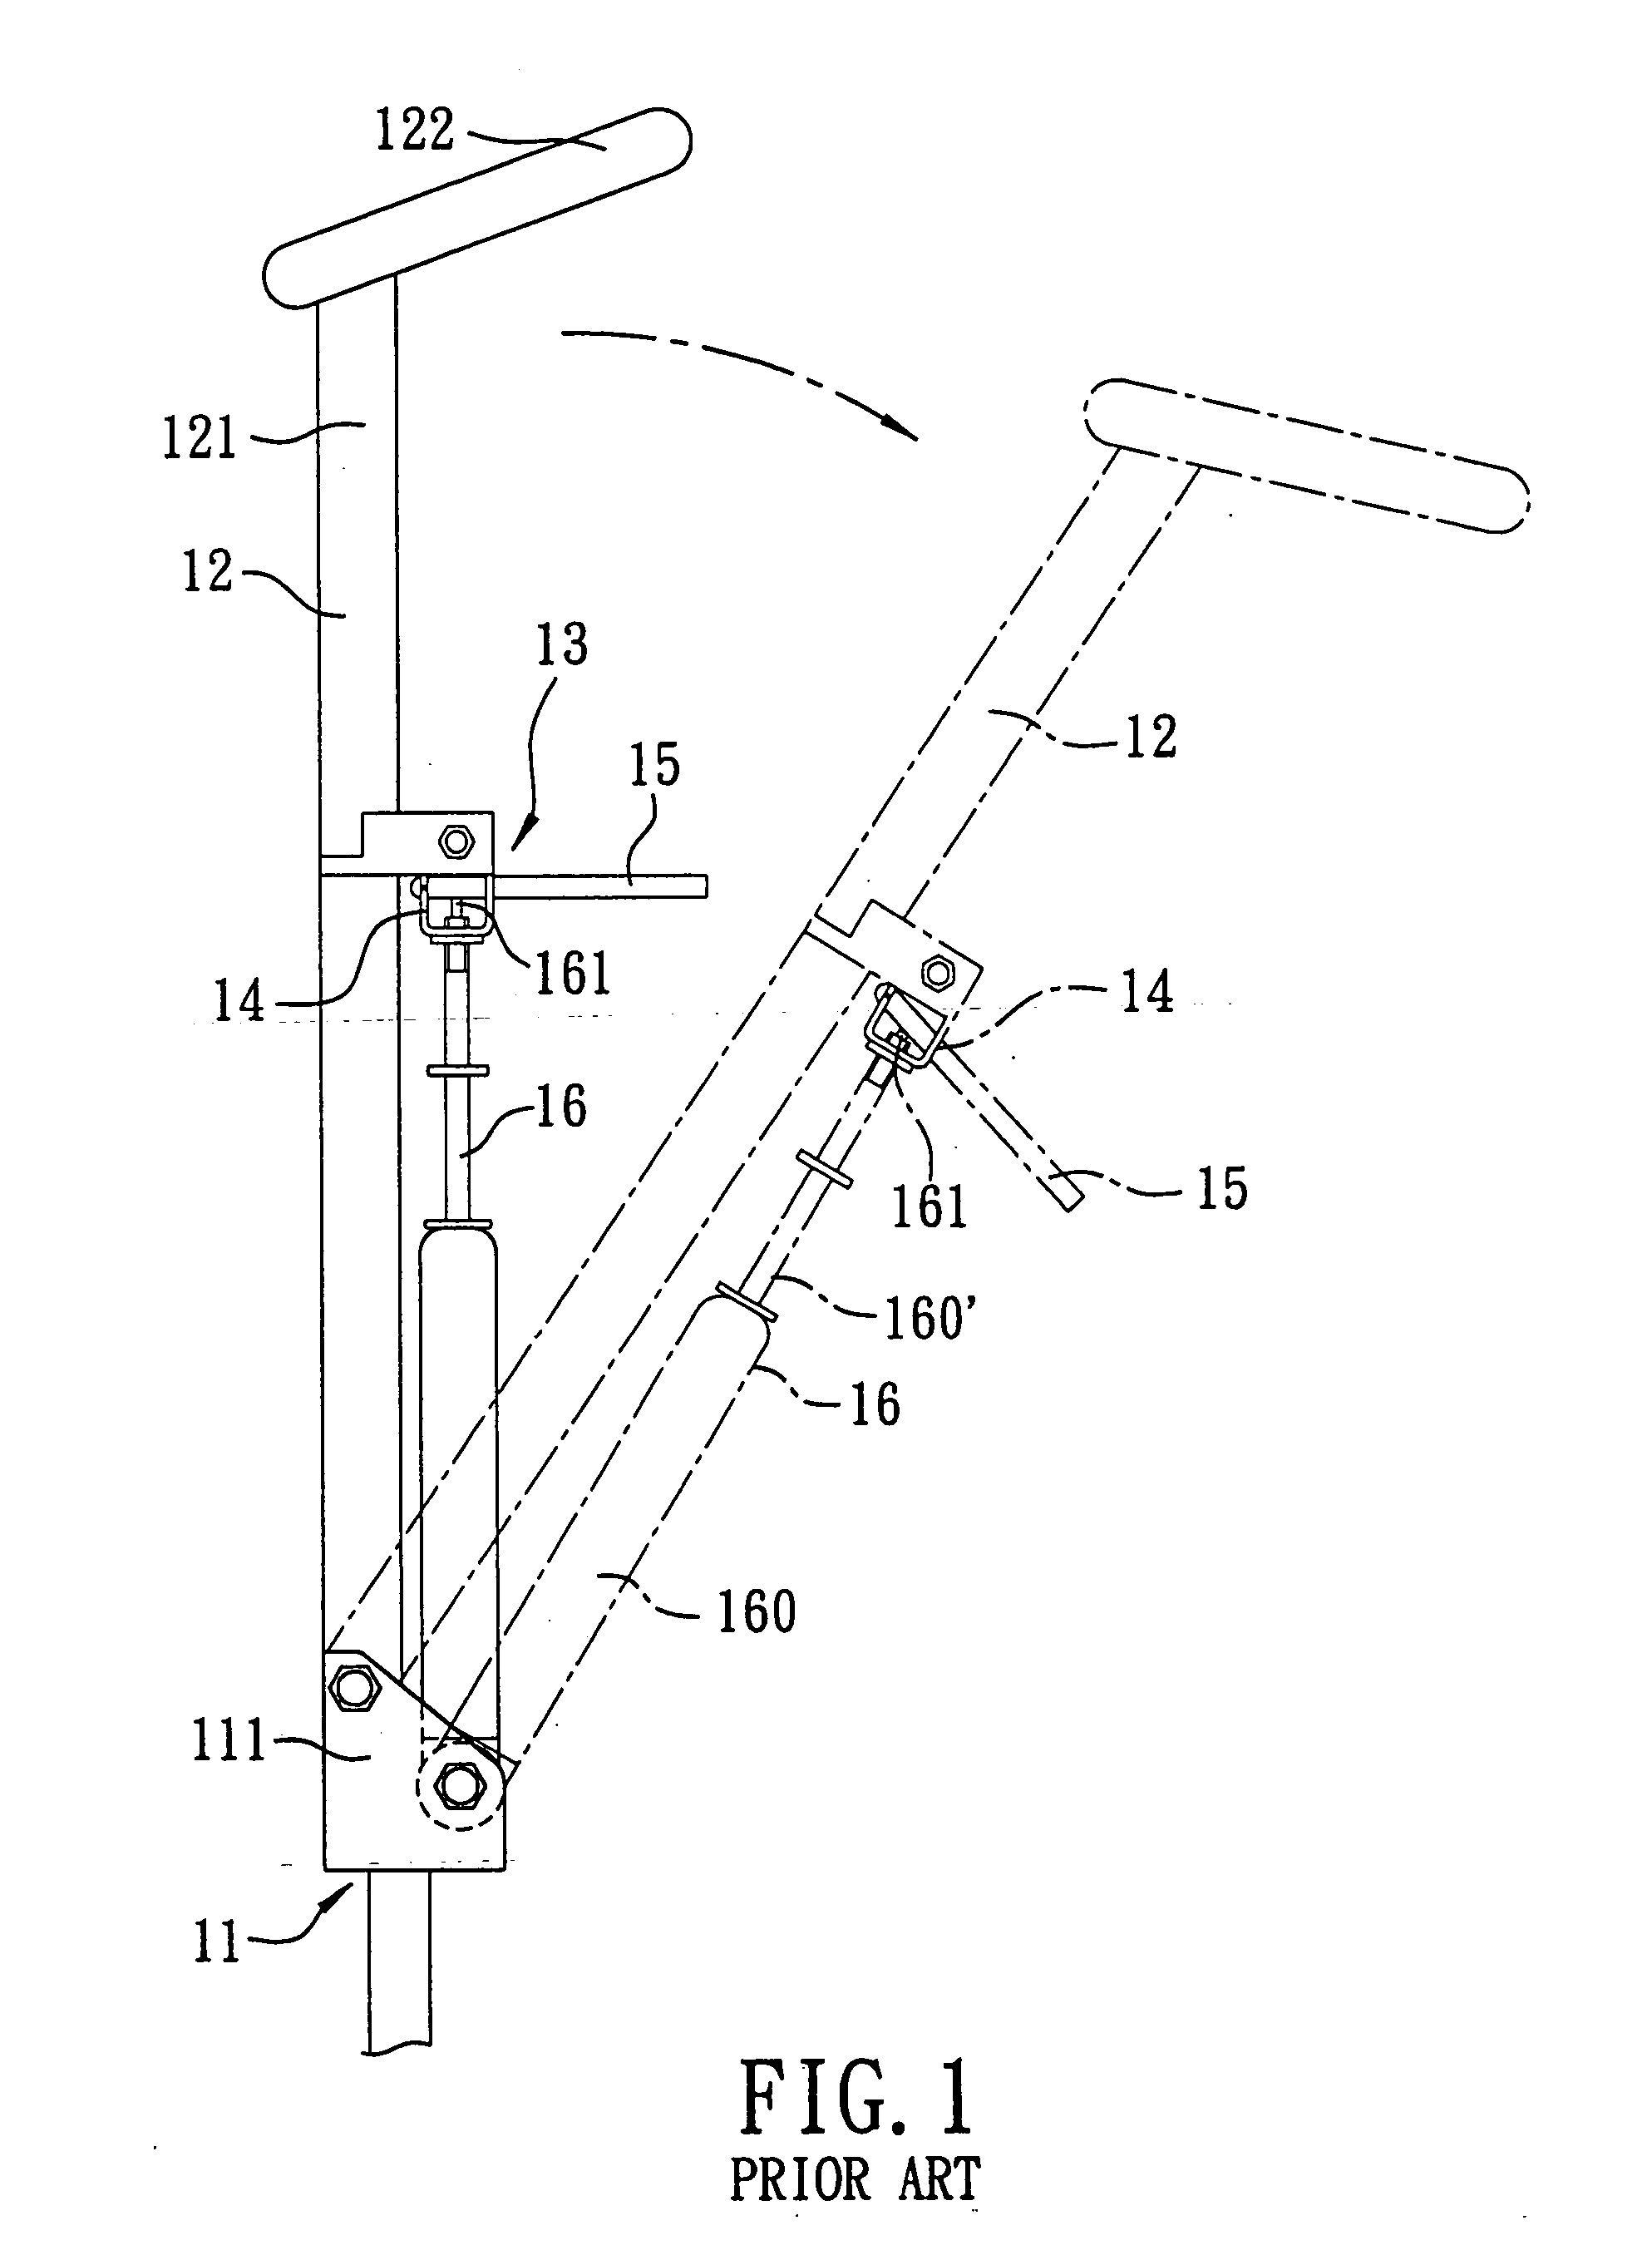 Handle-adjusting device for adjusting the position of a handle relative to a vehicle frame